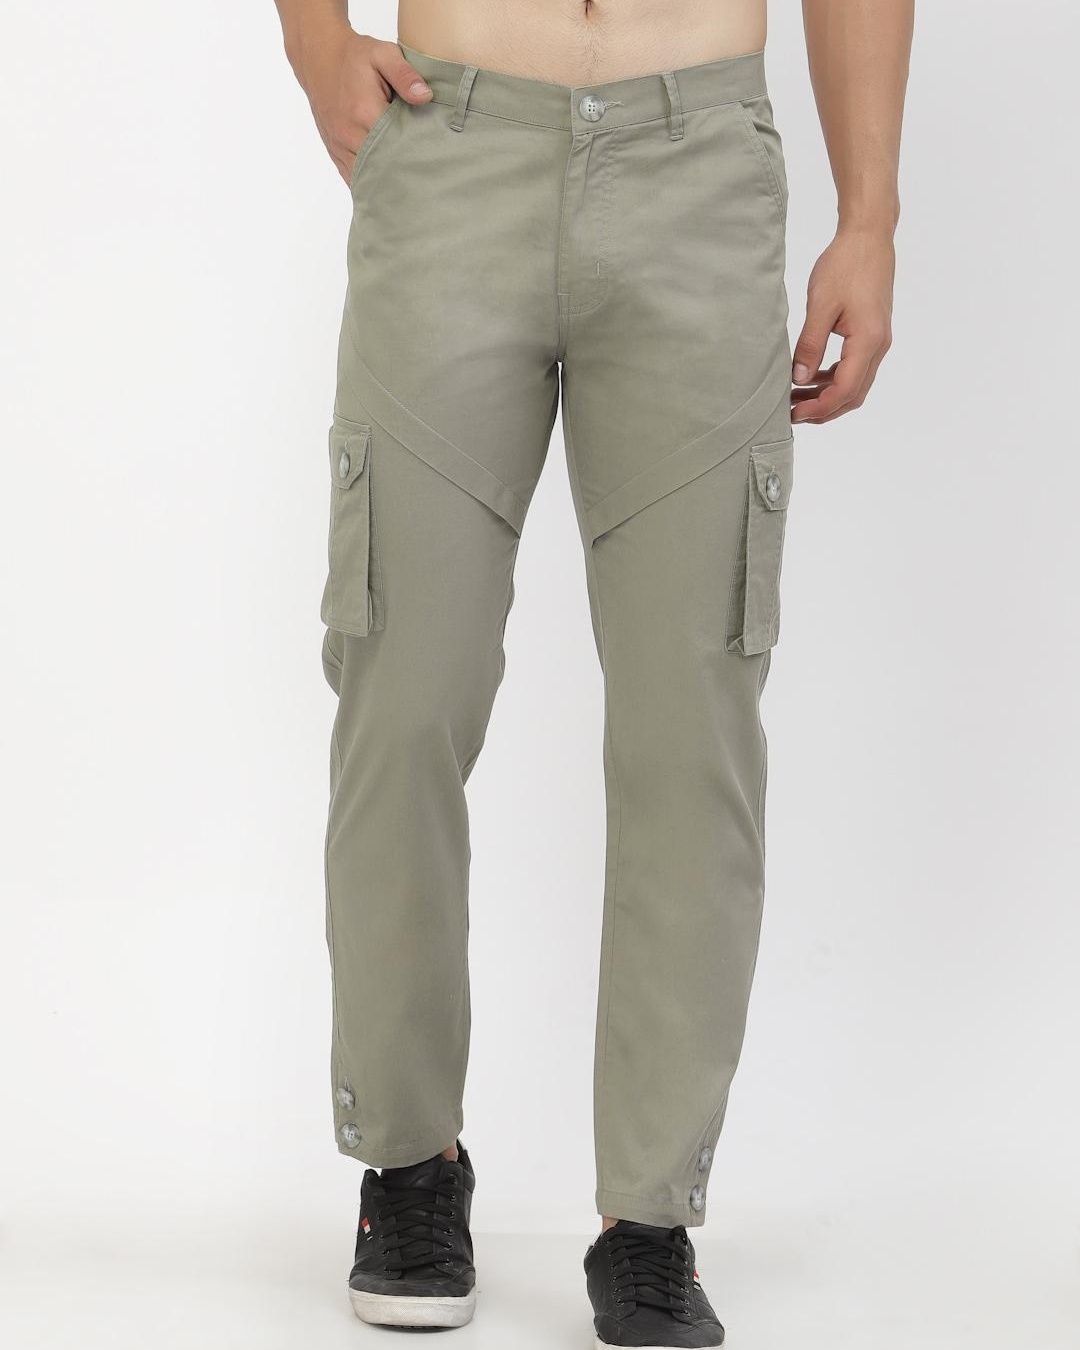 RETOUR JEANS Cargo Trousers Aliyah Olive Green for girls | NICKIS.com